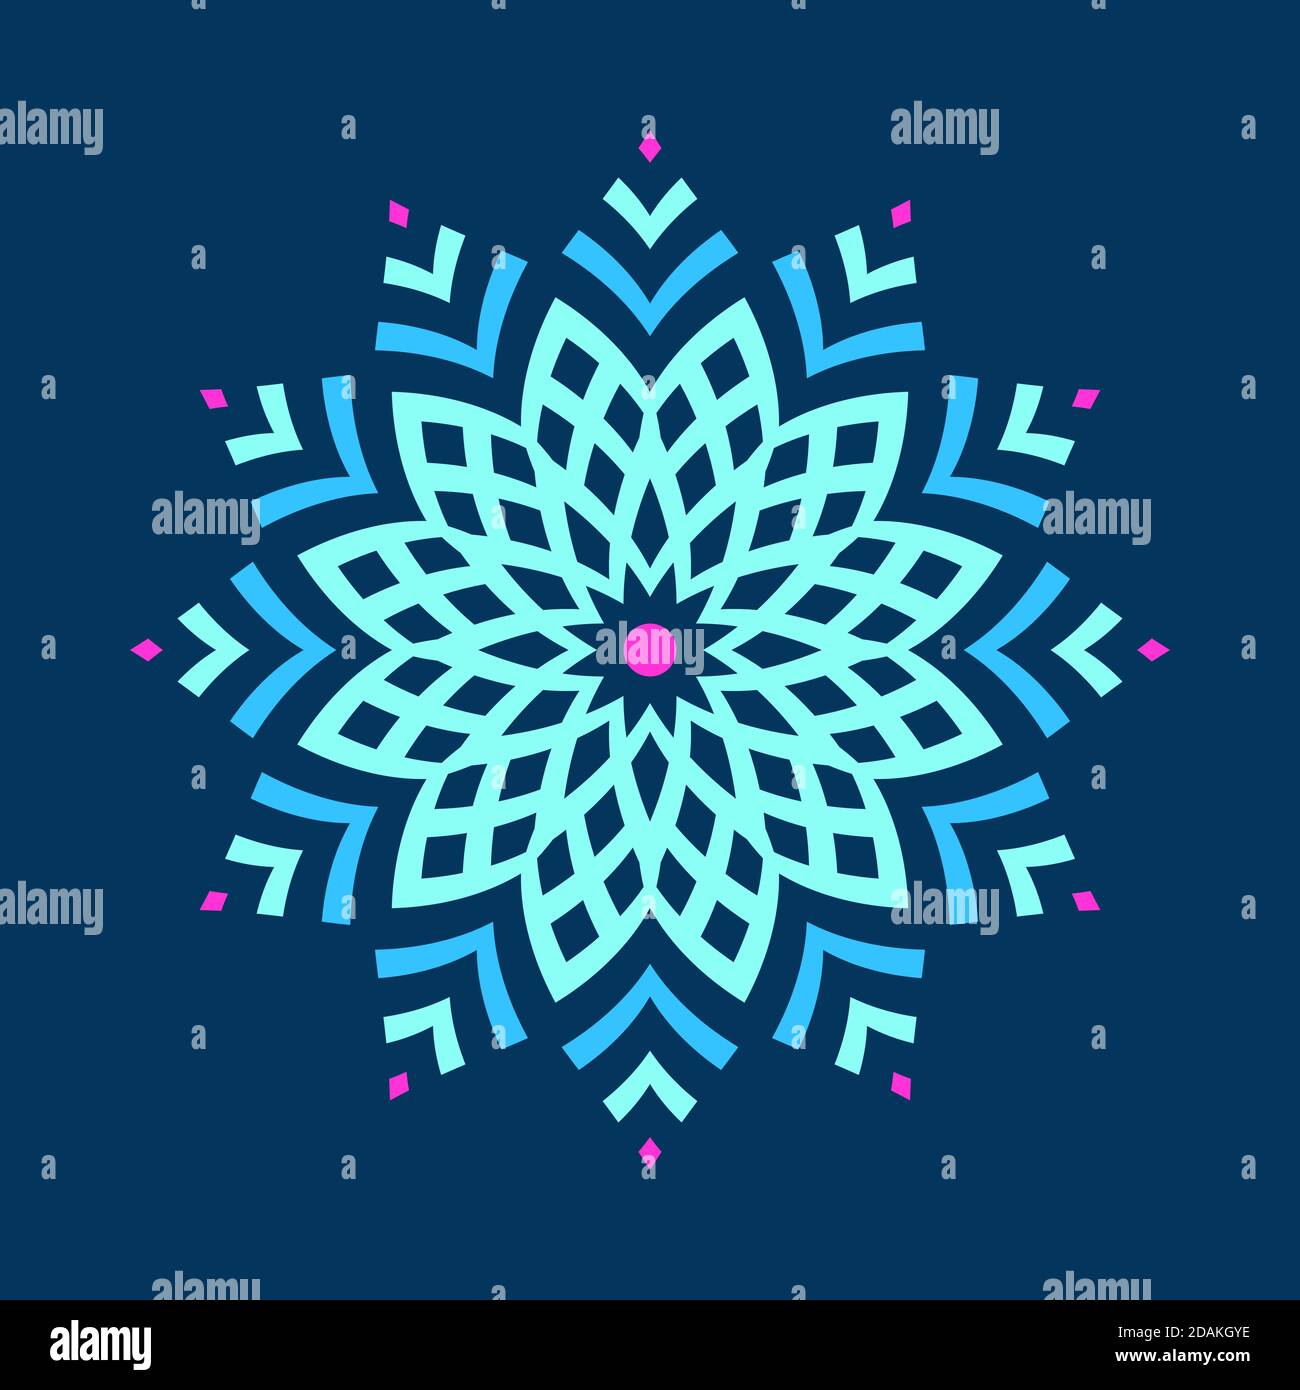 Abstract colorful symmetric symbol isolated on dark background. Stylized flower with striped petals. Logo. Design element. Star, snowflake. Stock Vector